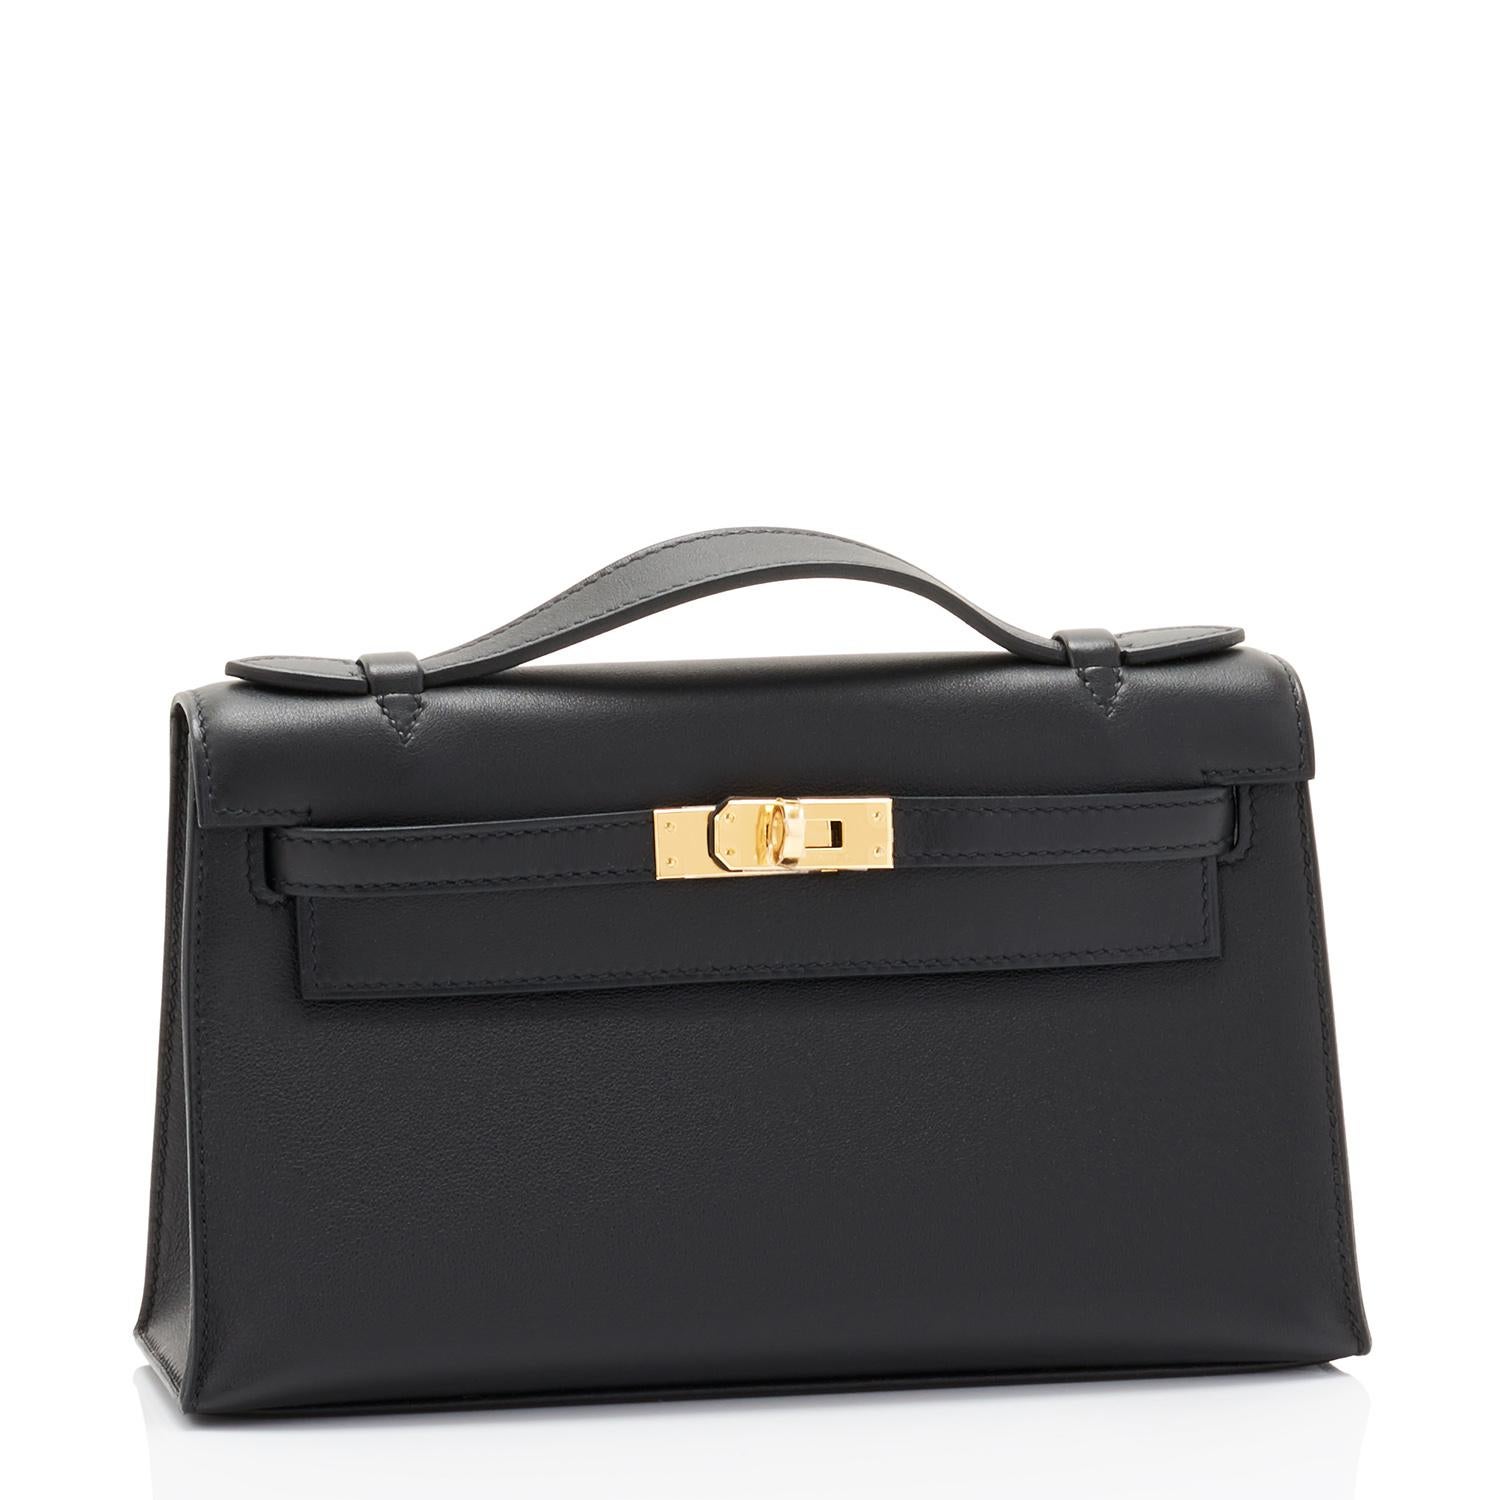 Hermes Kelly Pochette Black Gold Hardware Clutch Cut Bag Swift NEW
Brand New in Box. Store fresh. Pristine condition (with plastic on hardware).
Perfect gift! Comes with sleeper, rain protector, and orange Hermes box.
Kelly Pochette is so very rare.